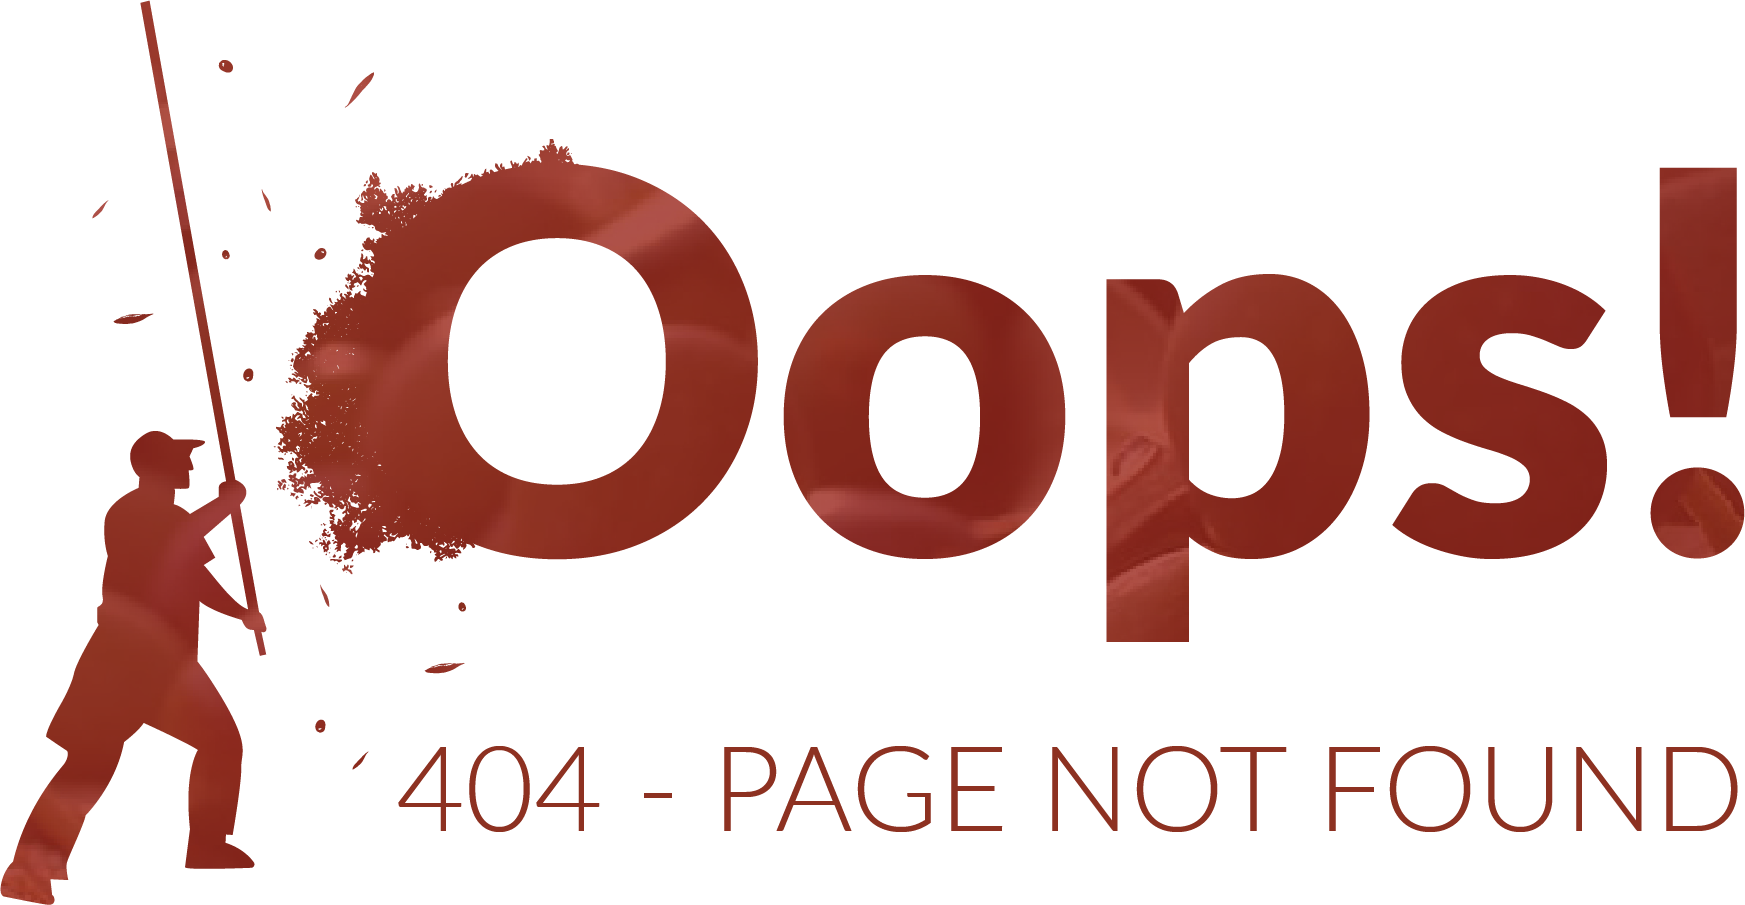 Oops! Page not found